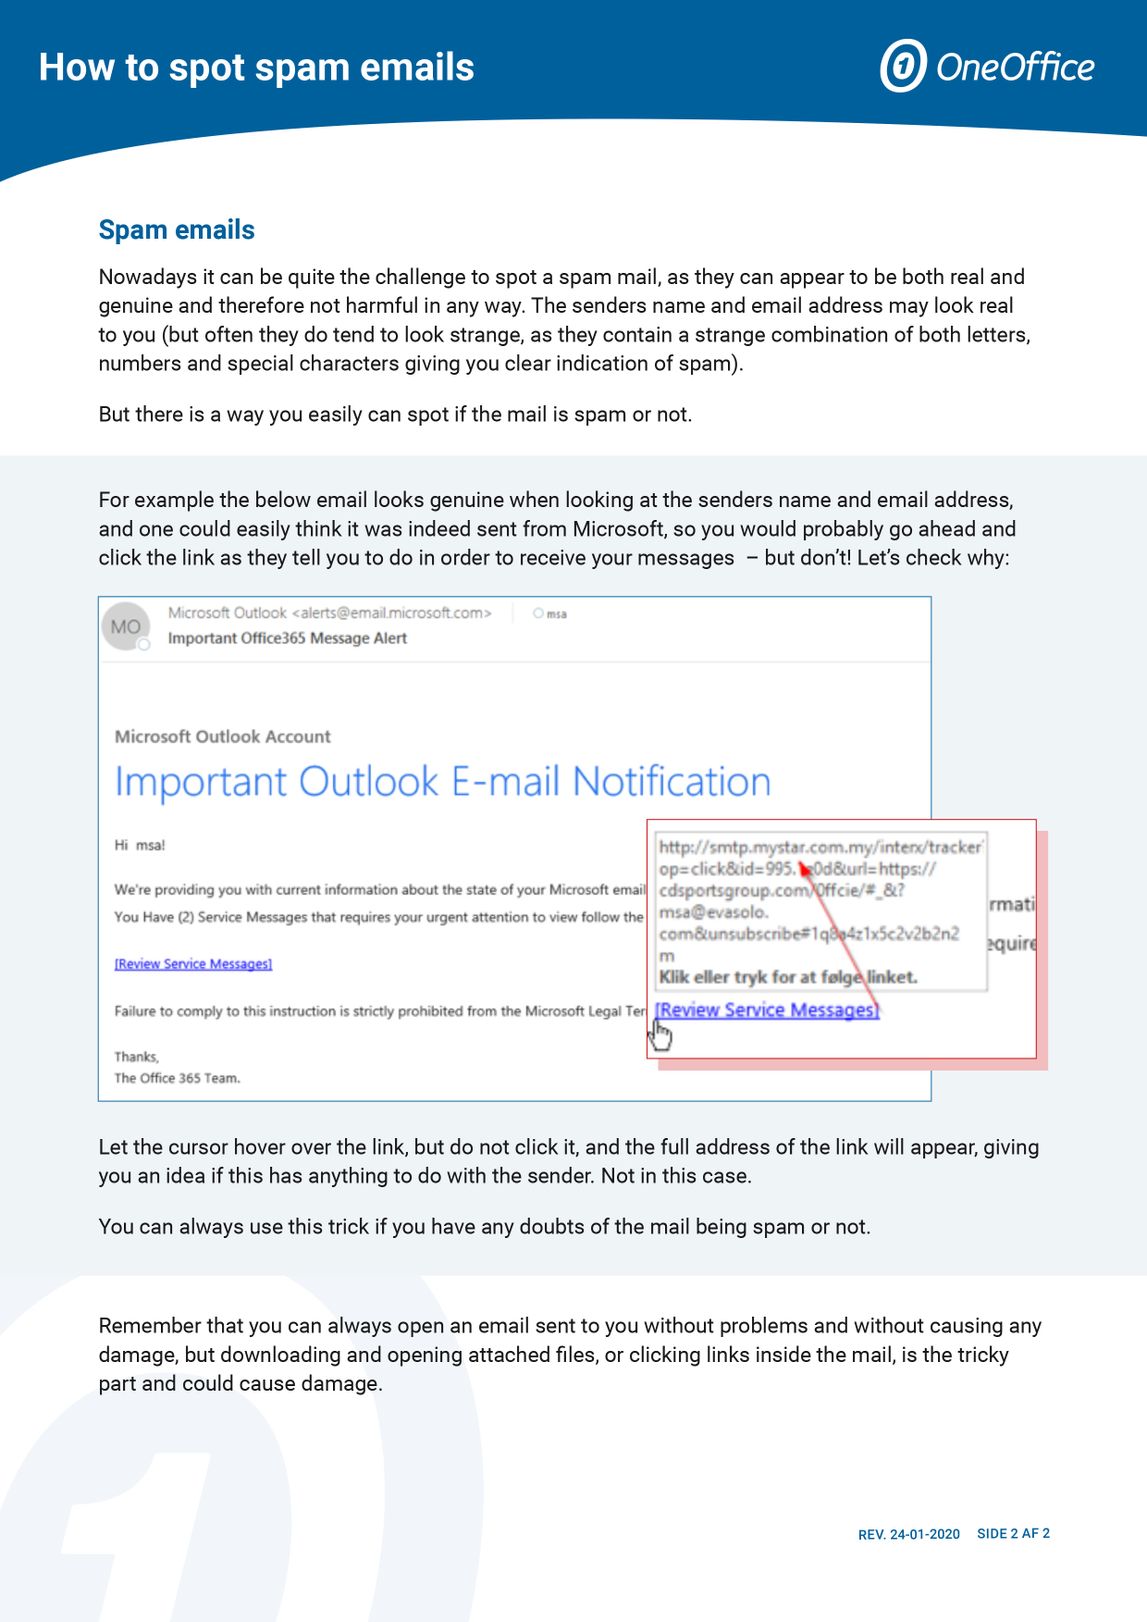 How to spot spam emails by OneOffice